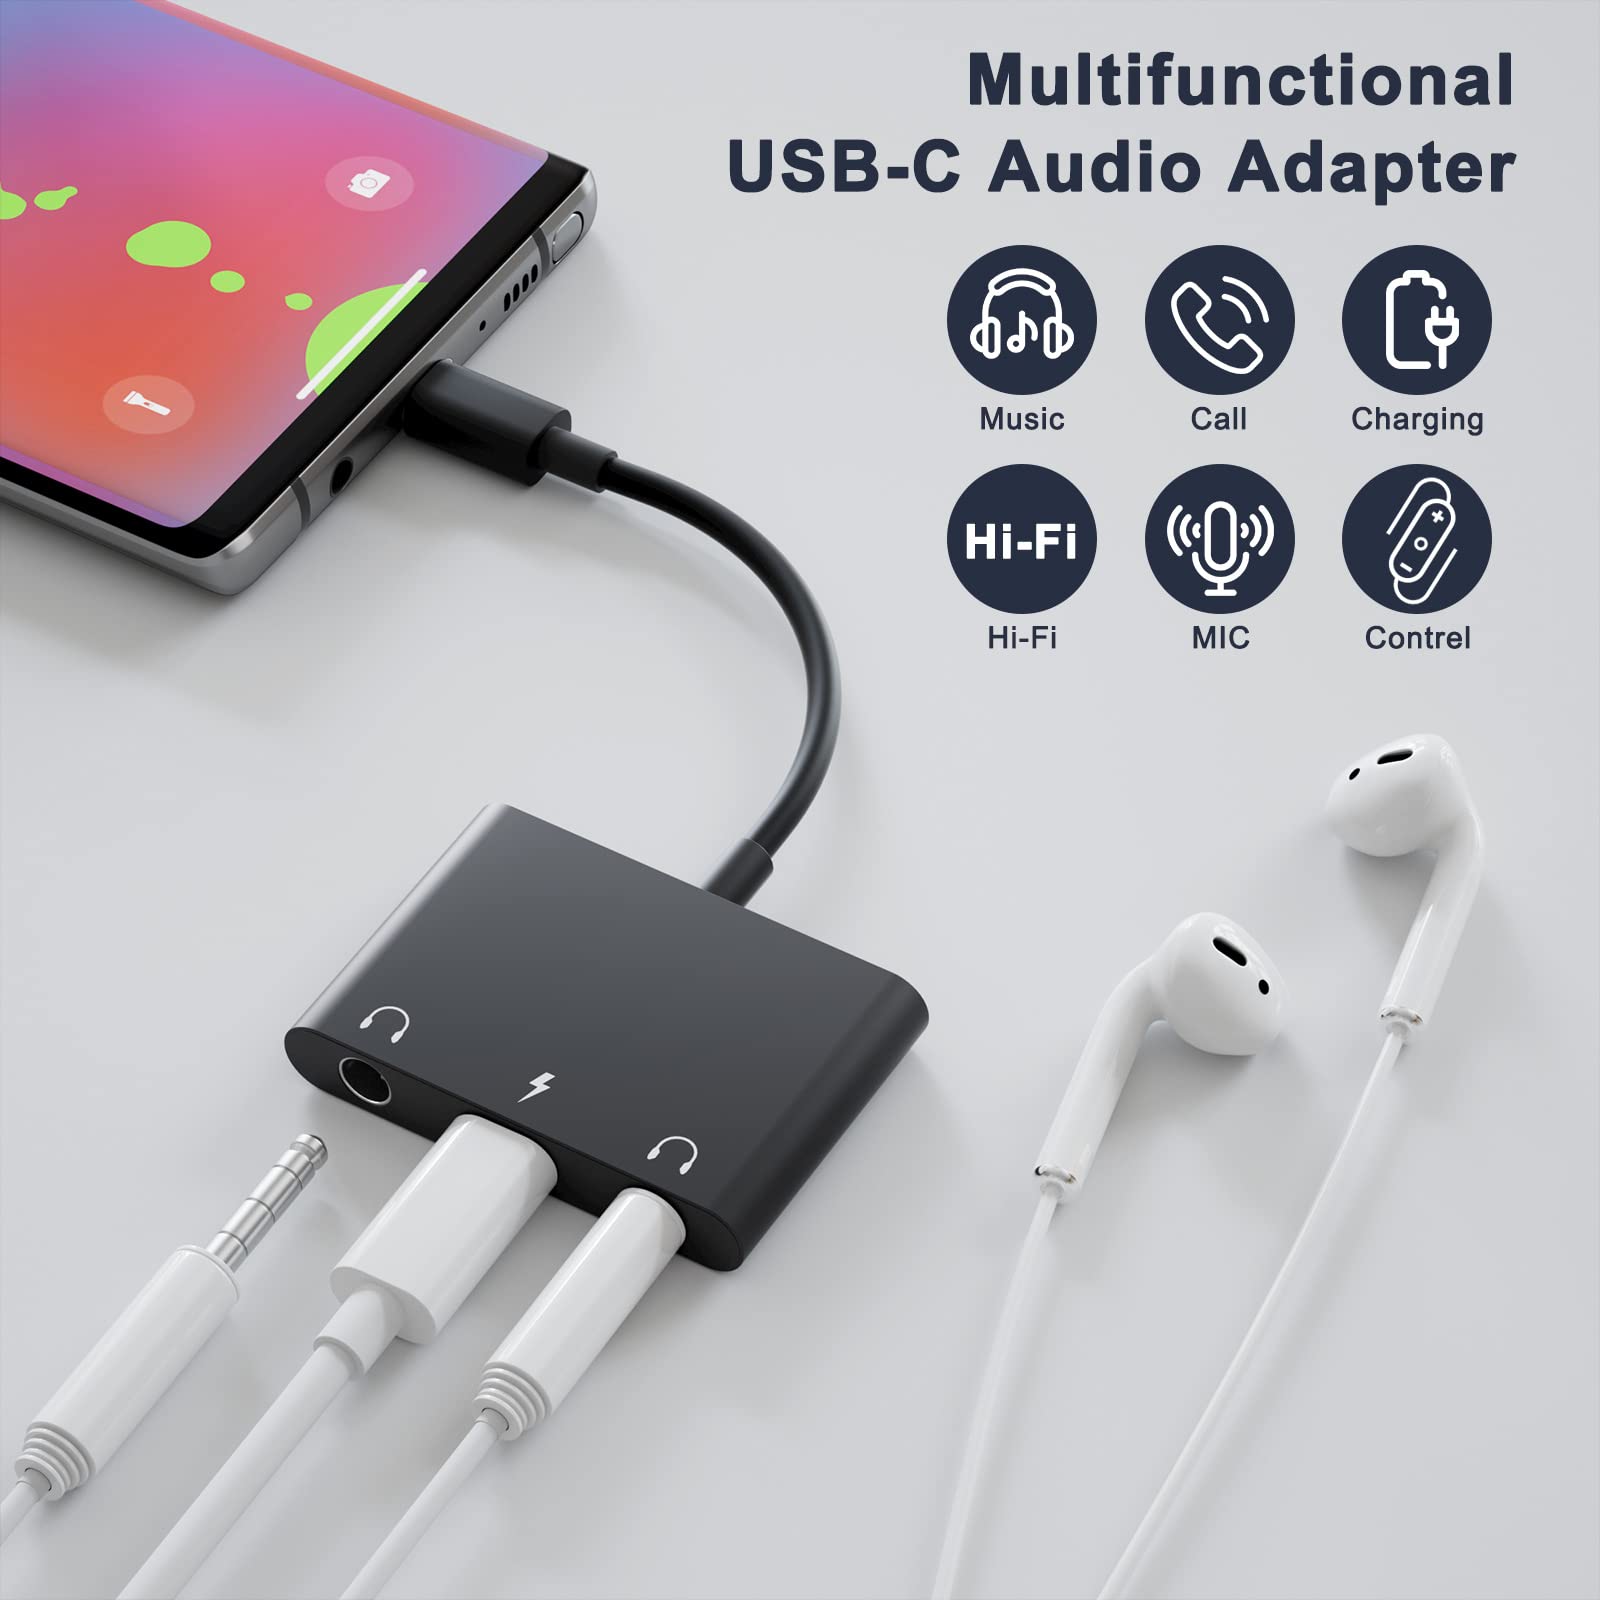 UWECAN USB C Headphone Adapter,3 in 1 USBC to 3.5mm Dual Headphone Jack Adapter for Stereo,USB-C Audio Adapter with Type-c Fast Charging Port,Headphone Splitter Compatible iPad Pro,Samsung,Google,etc